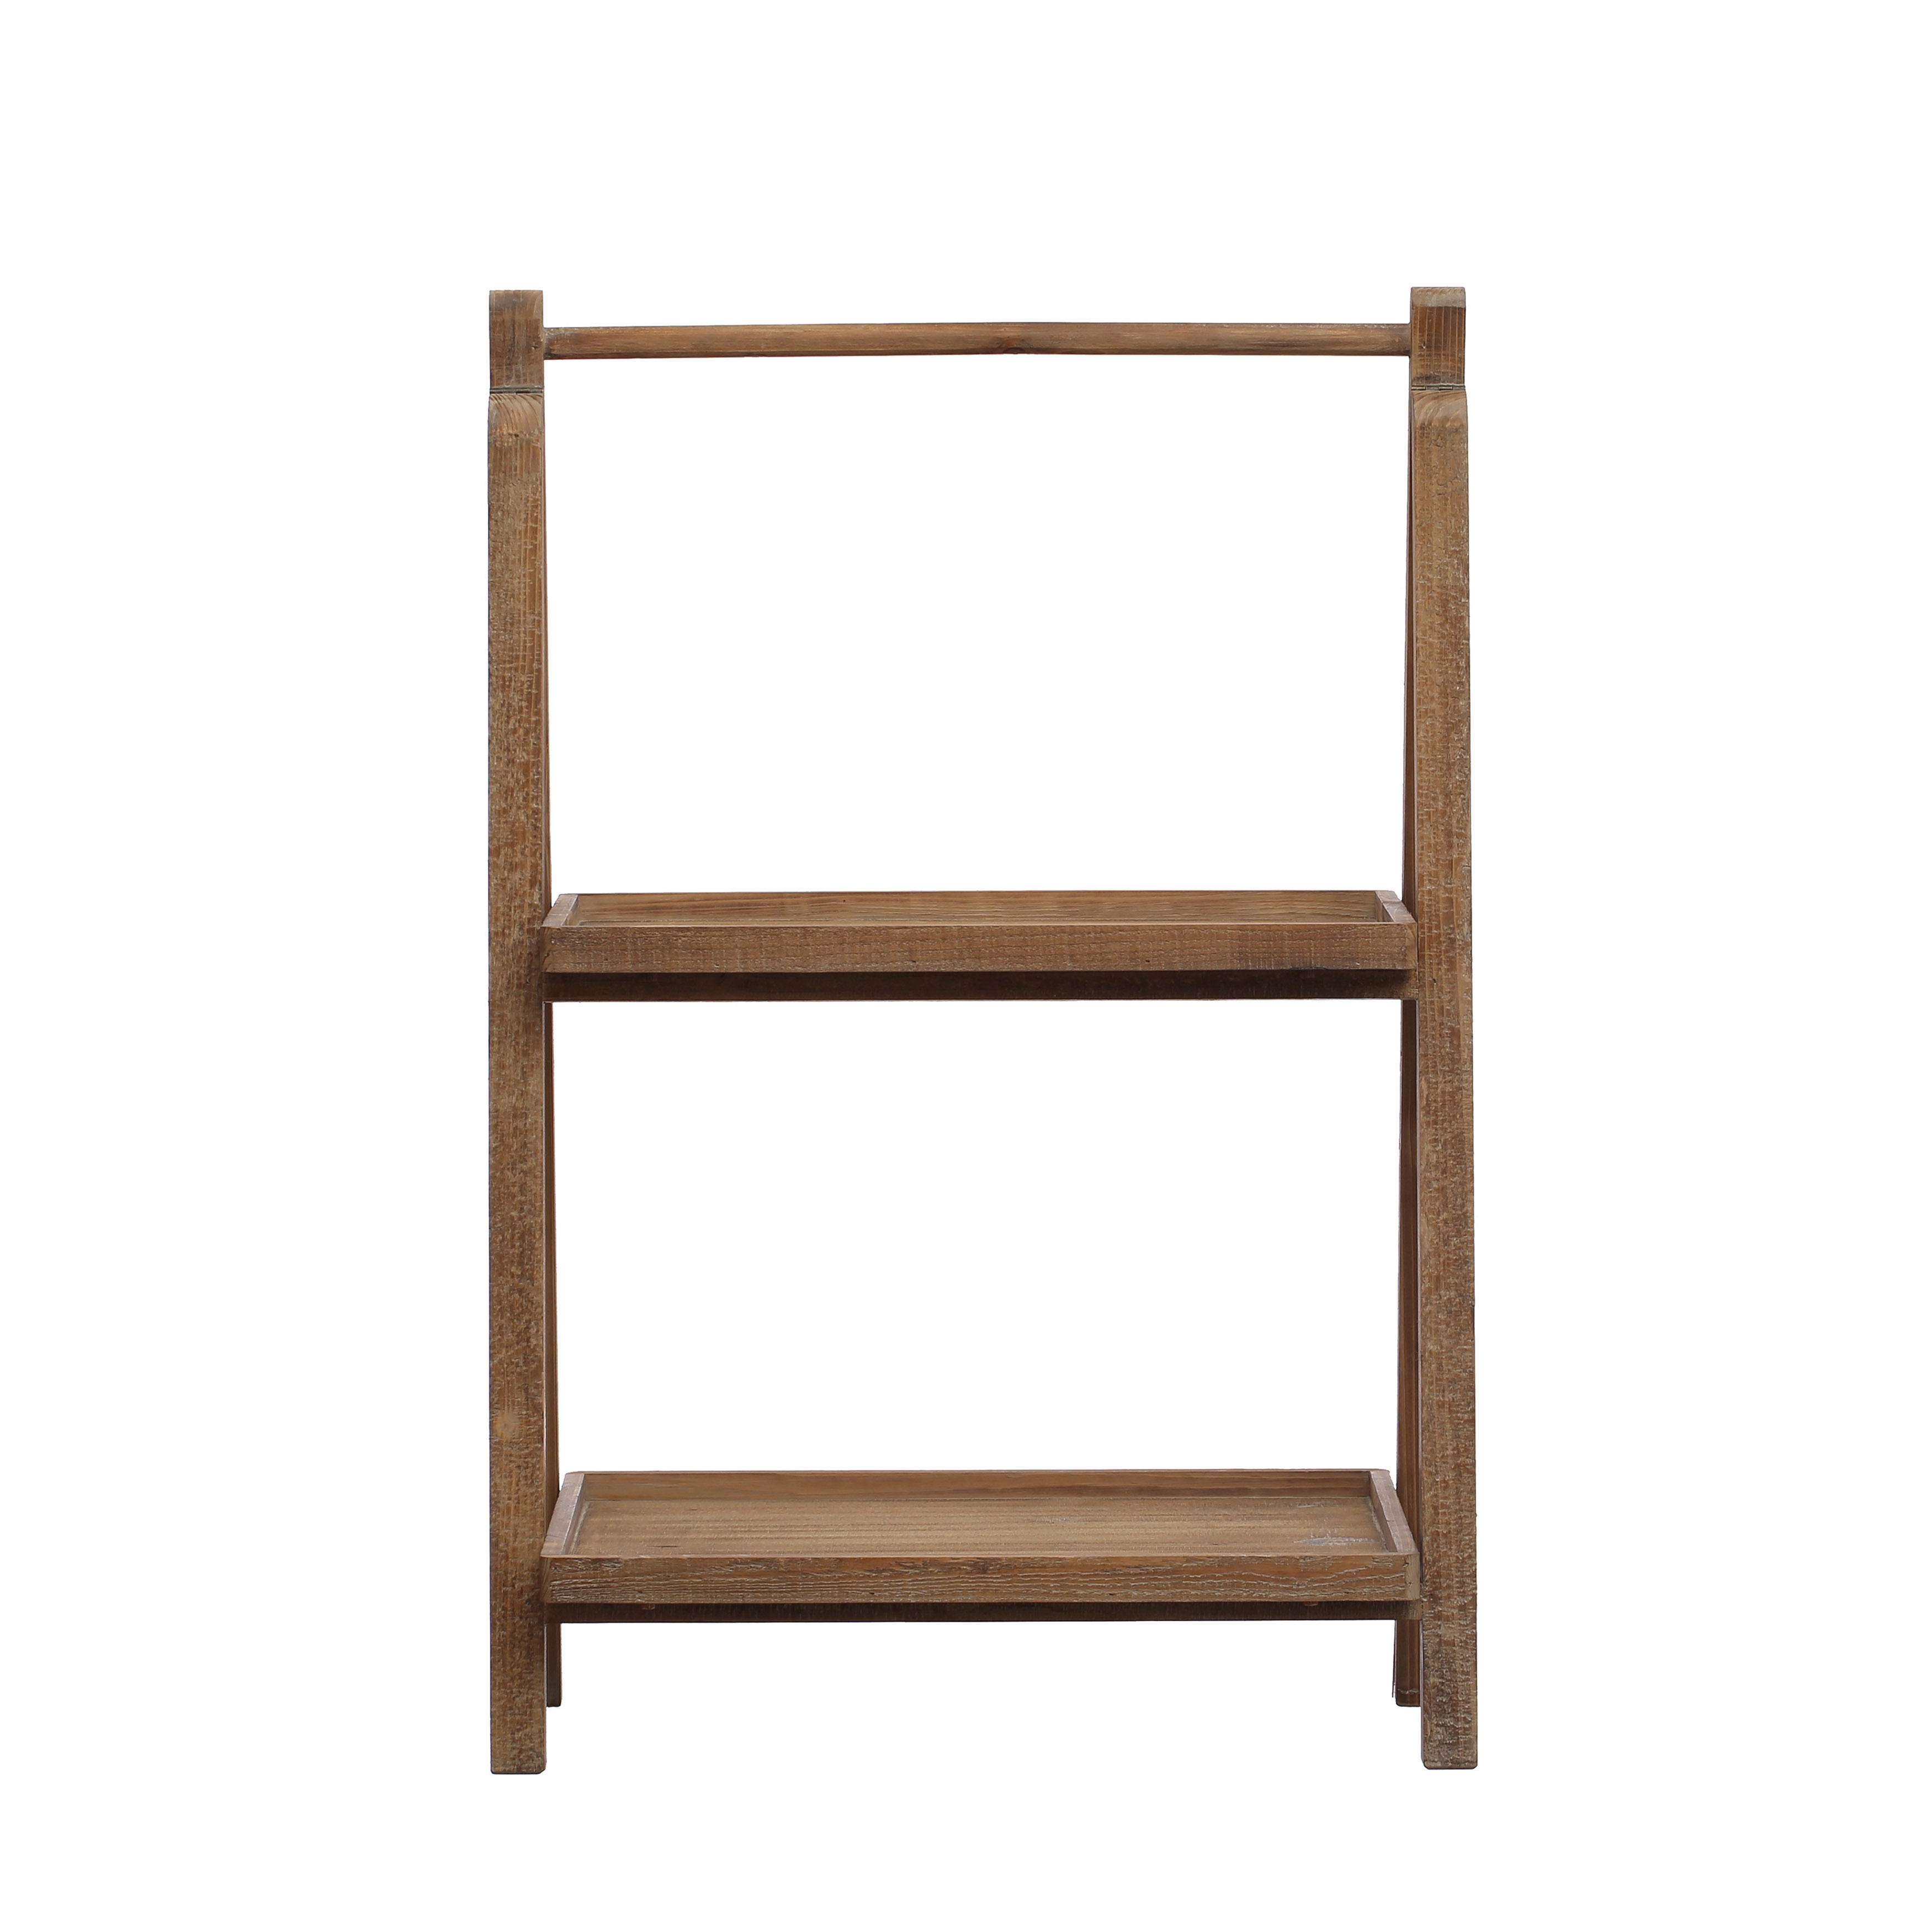 Rustic 2-Tier Wood Folding Stand/Shelf, Natural - Image 0